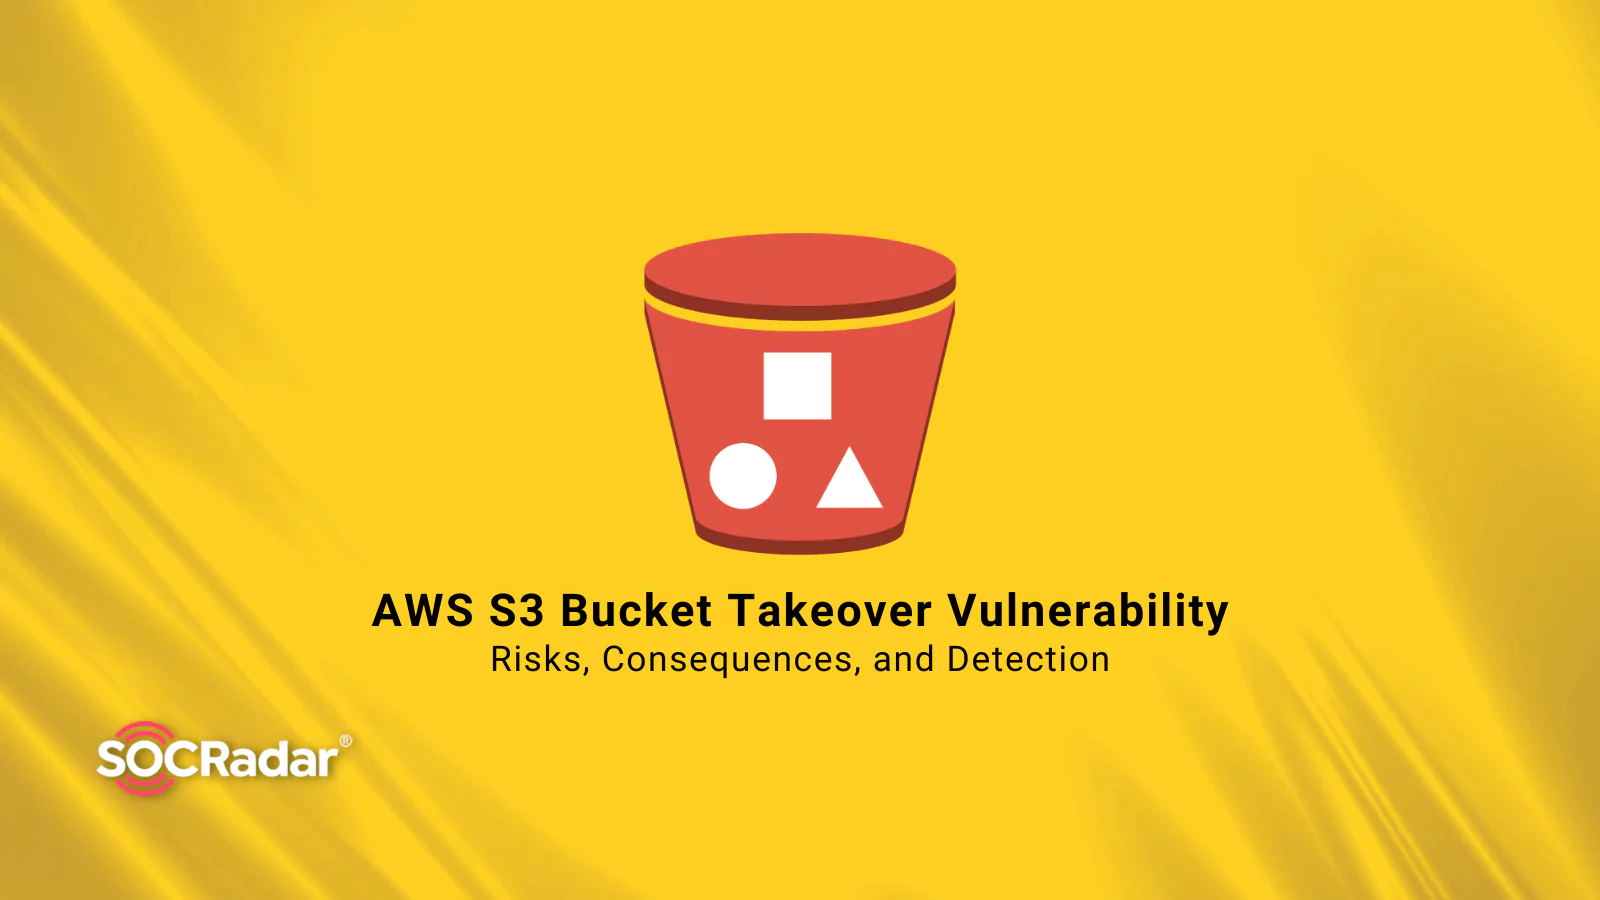 SOCRadar® Cyber Intelligence Inc. | AWS S3 Bucket Takeover Vulnerability: Risks, Consequences, and Detection